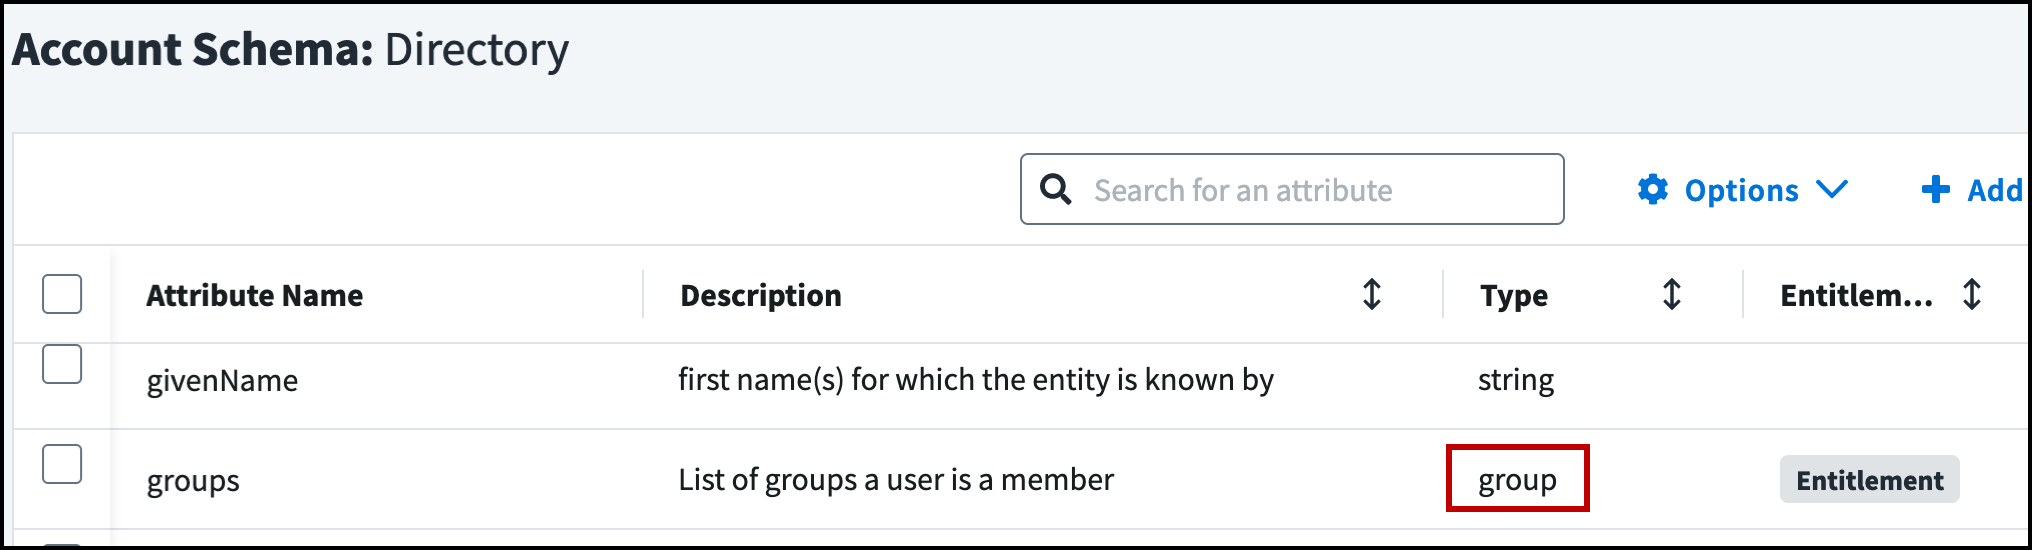 Account schema for a Directory with the groups attribute and group entitlement type emphasized.